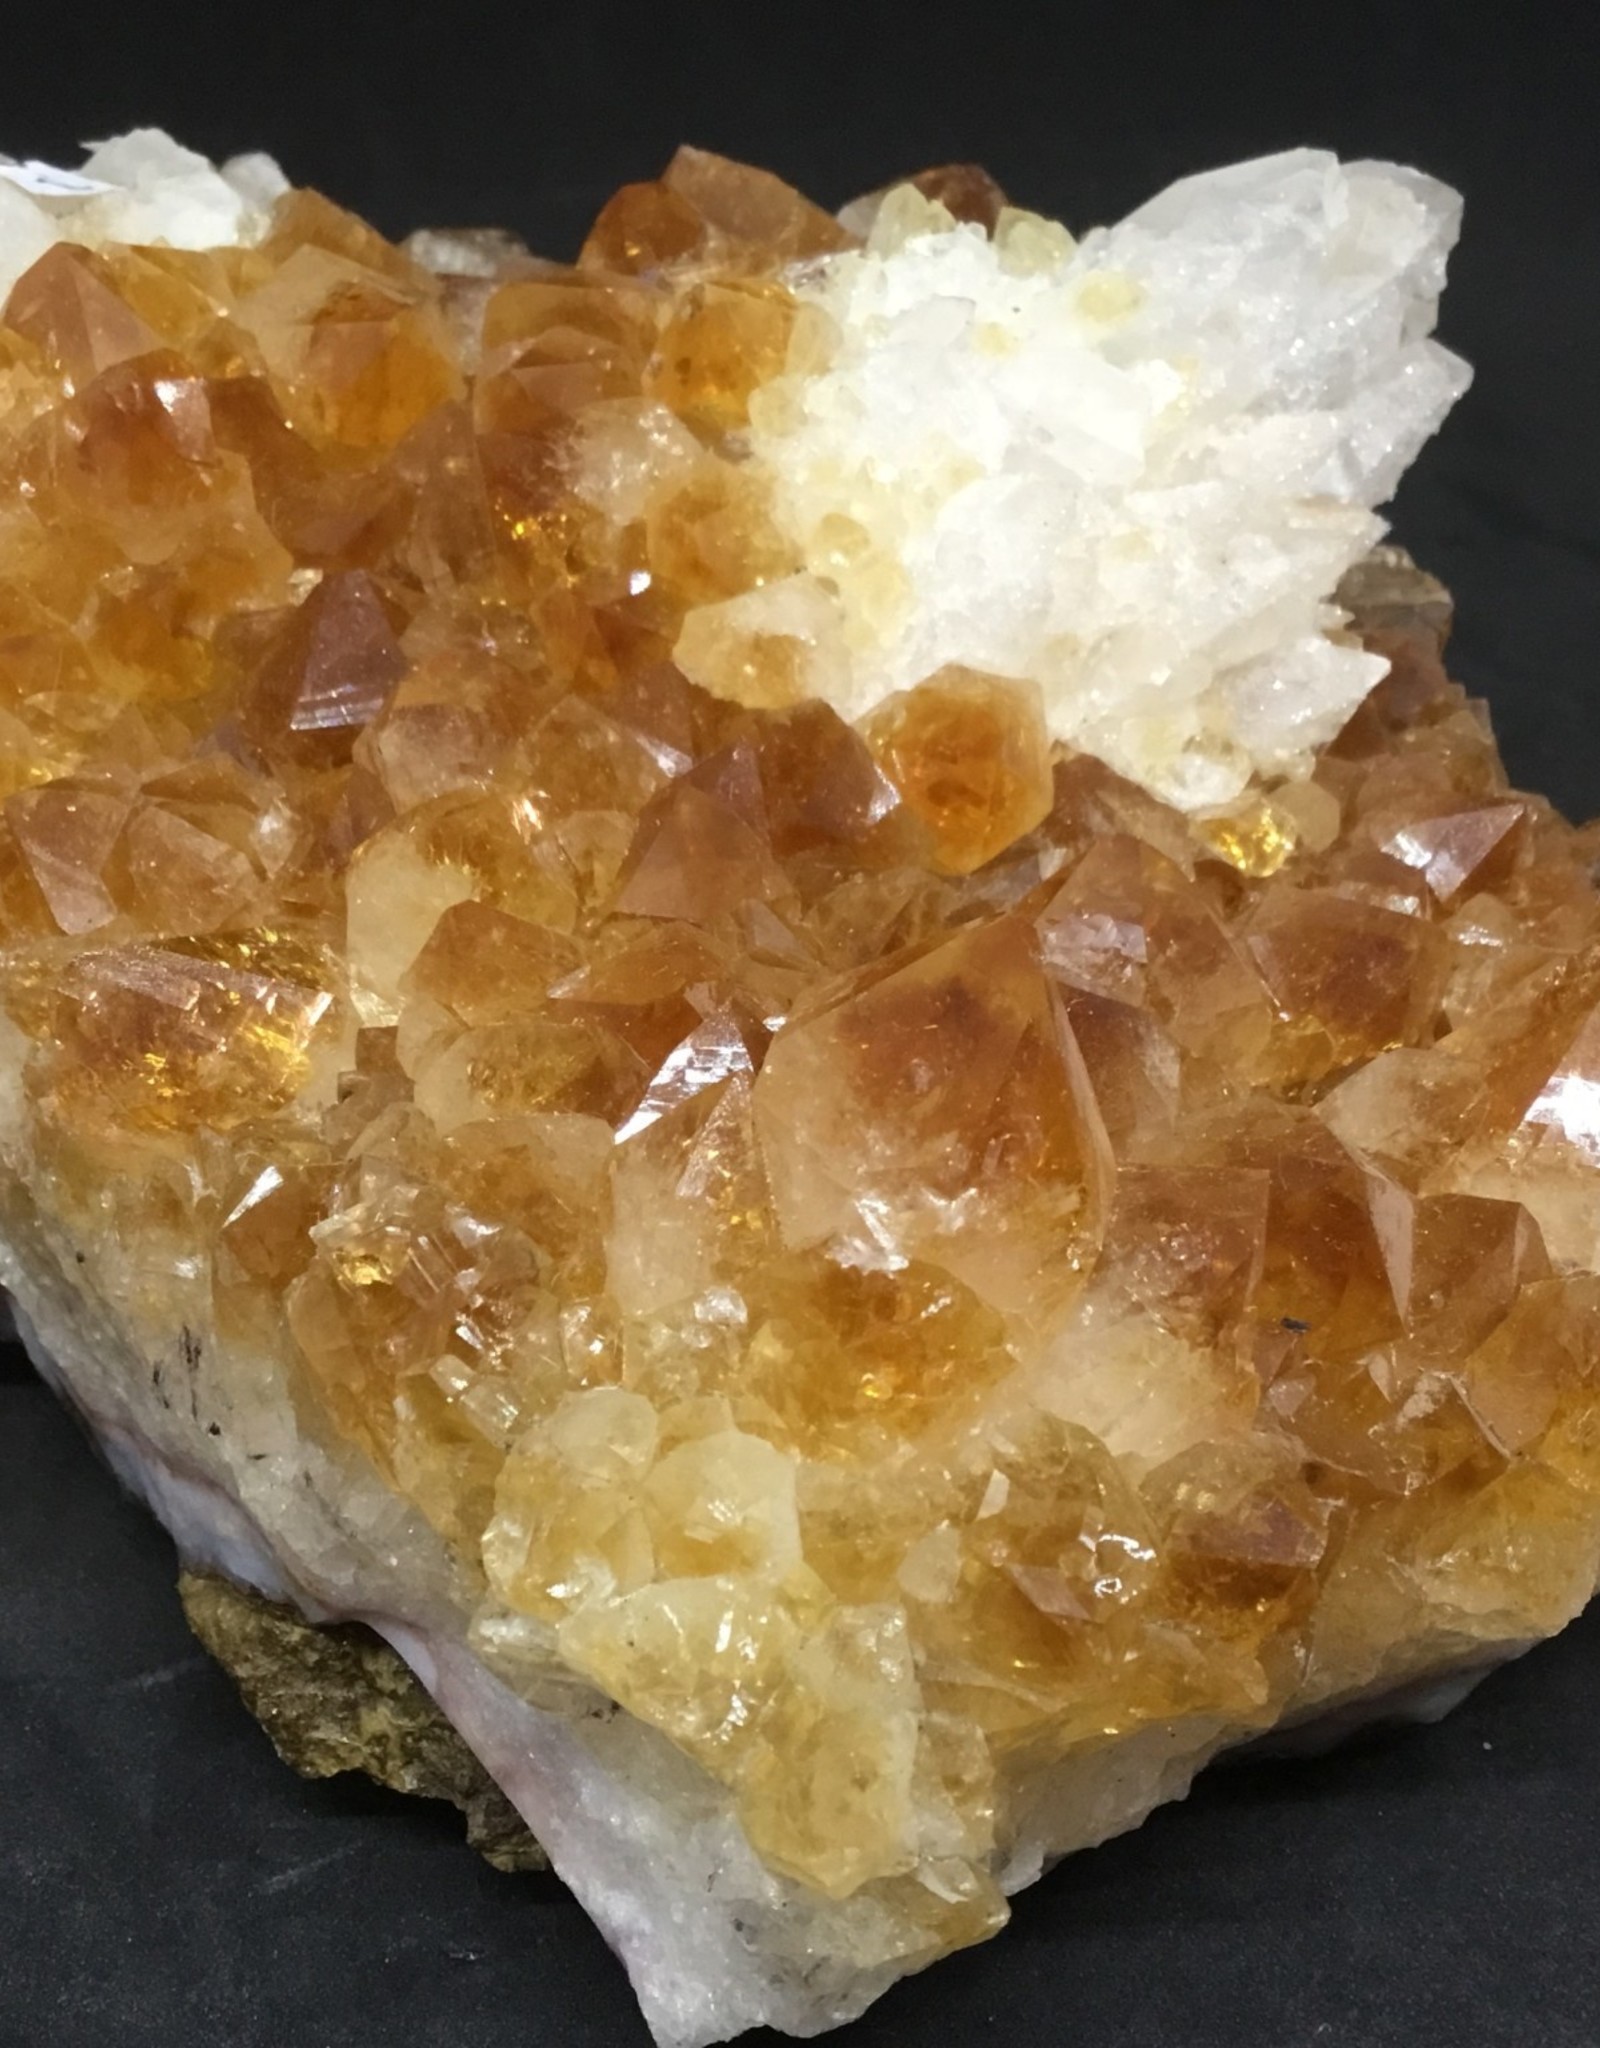 Citrine Cluster - Larger with white calcite